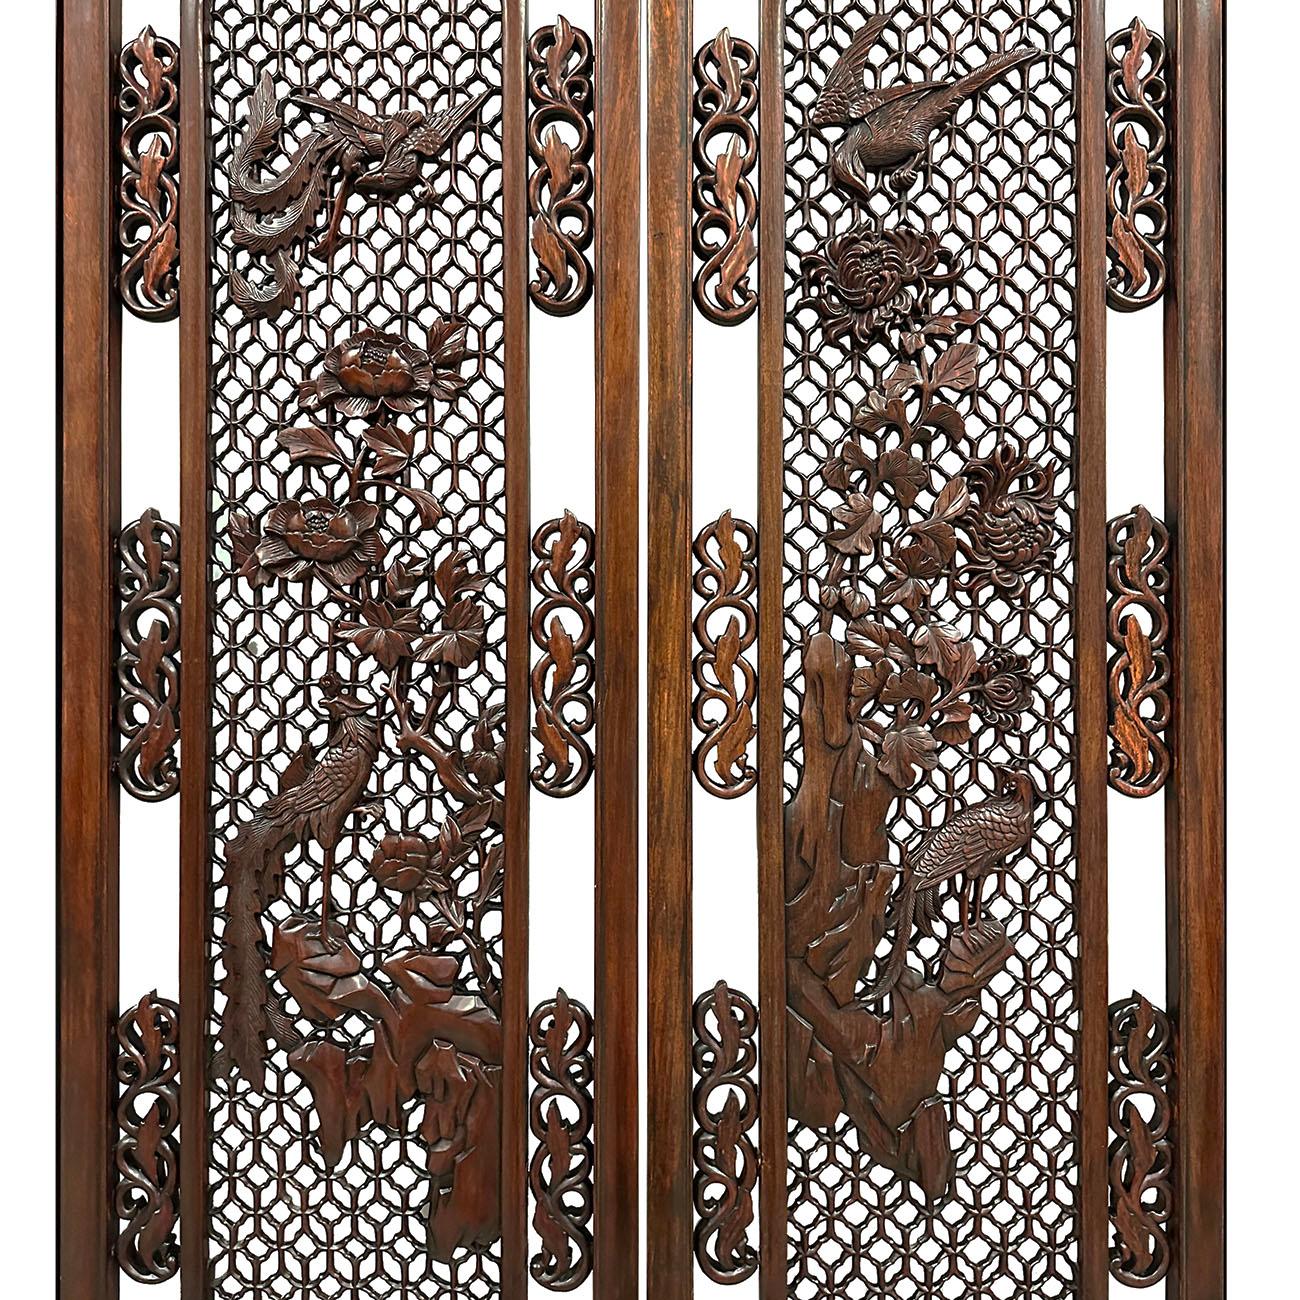 Mid-20th Century Chinese Rosewood Open Carved Screen/Room Divider For Sale 2